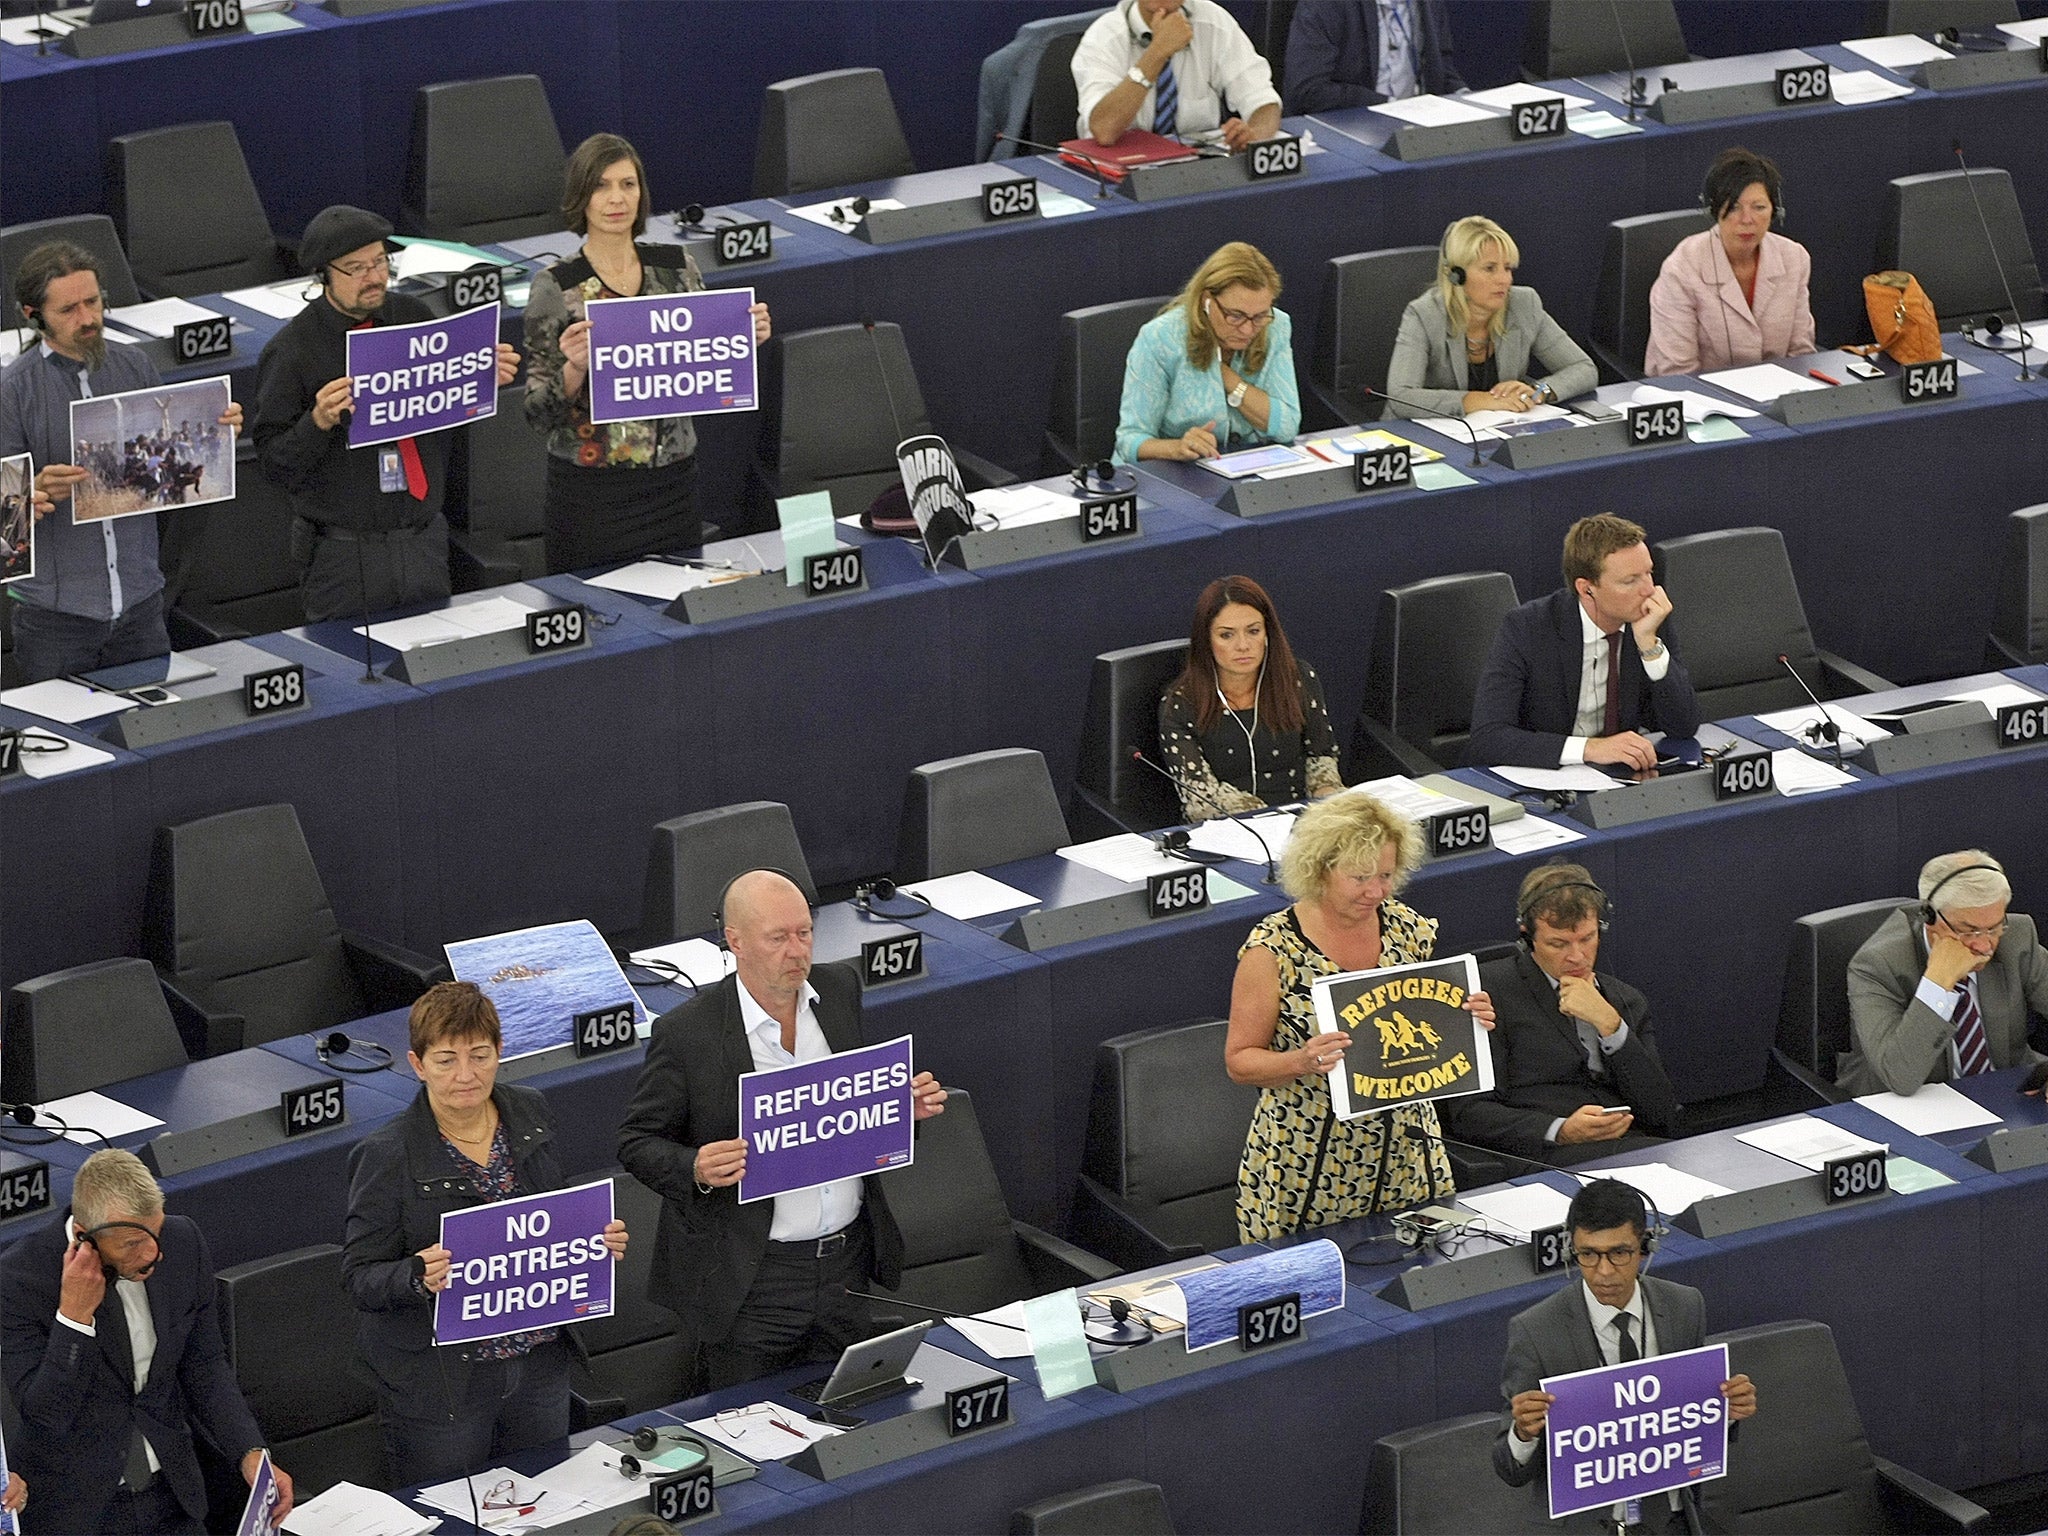 MEPs hold posters while Jean-Claude Juncker delivers his address